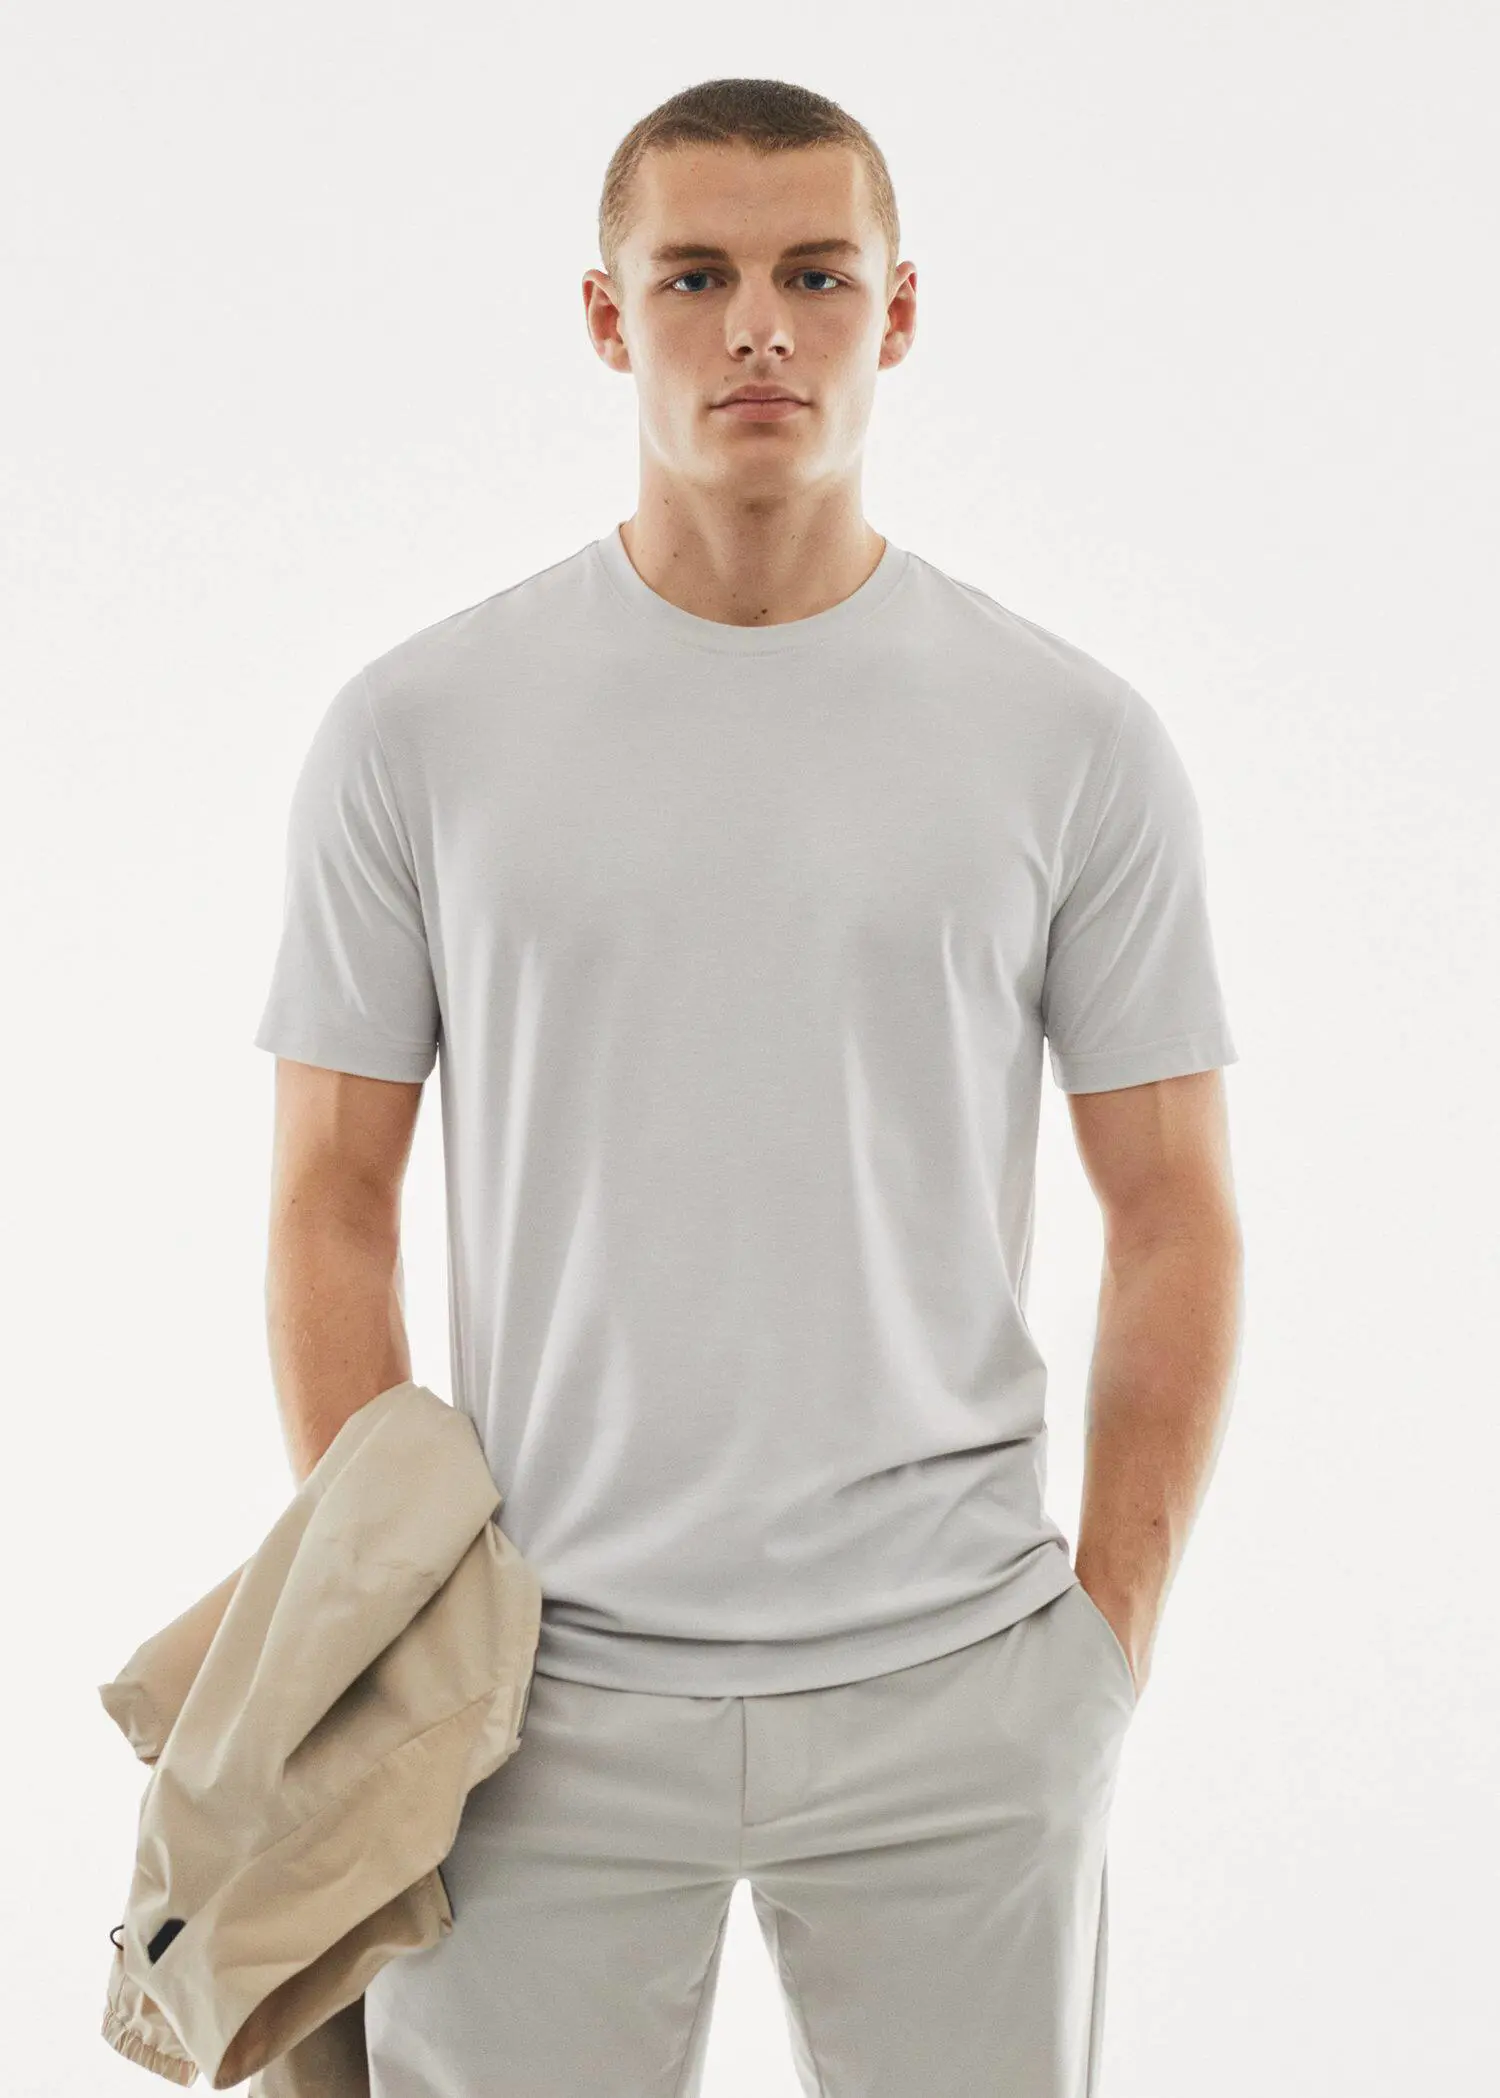 Mango Quick-drying technical t-shirt. a man in a white shirt holding a jacket. 